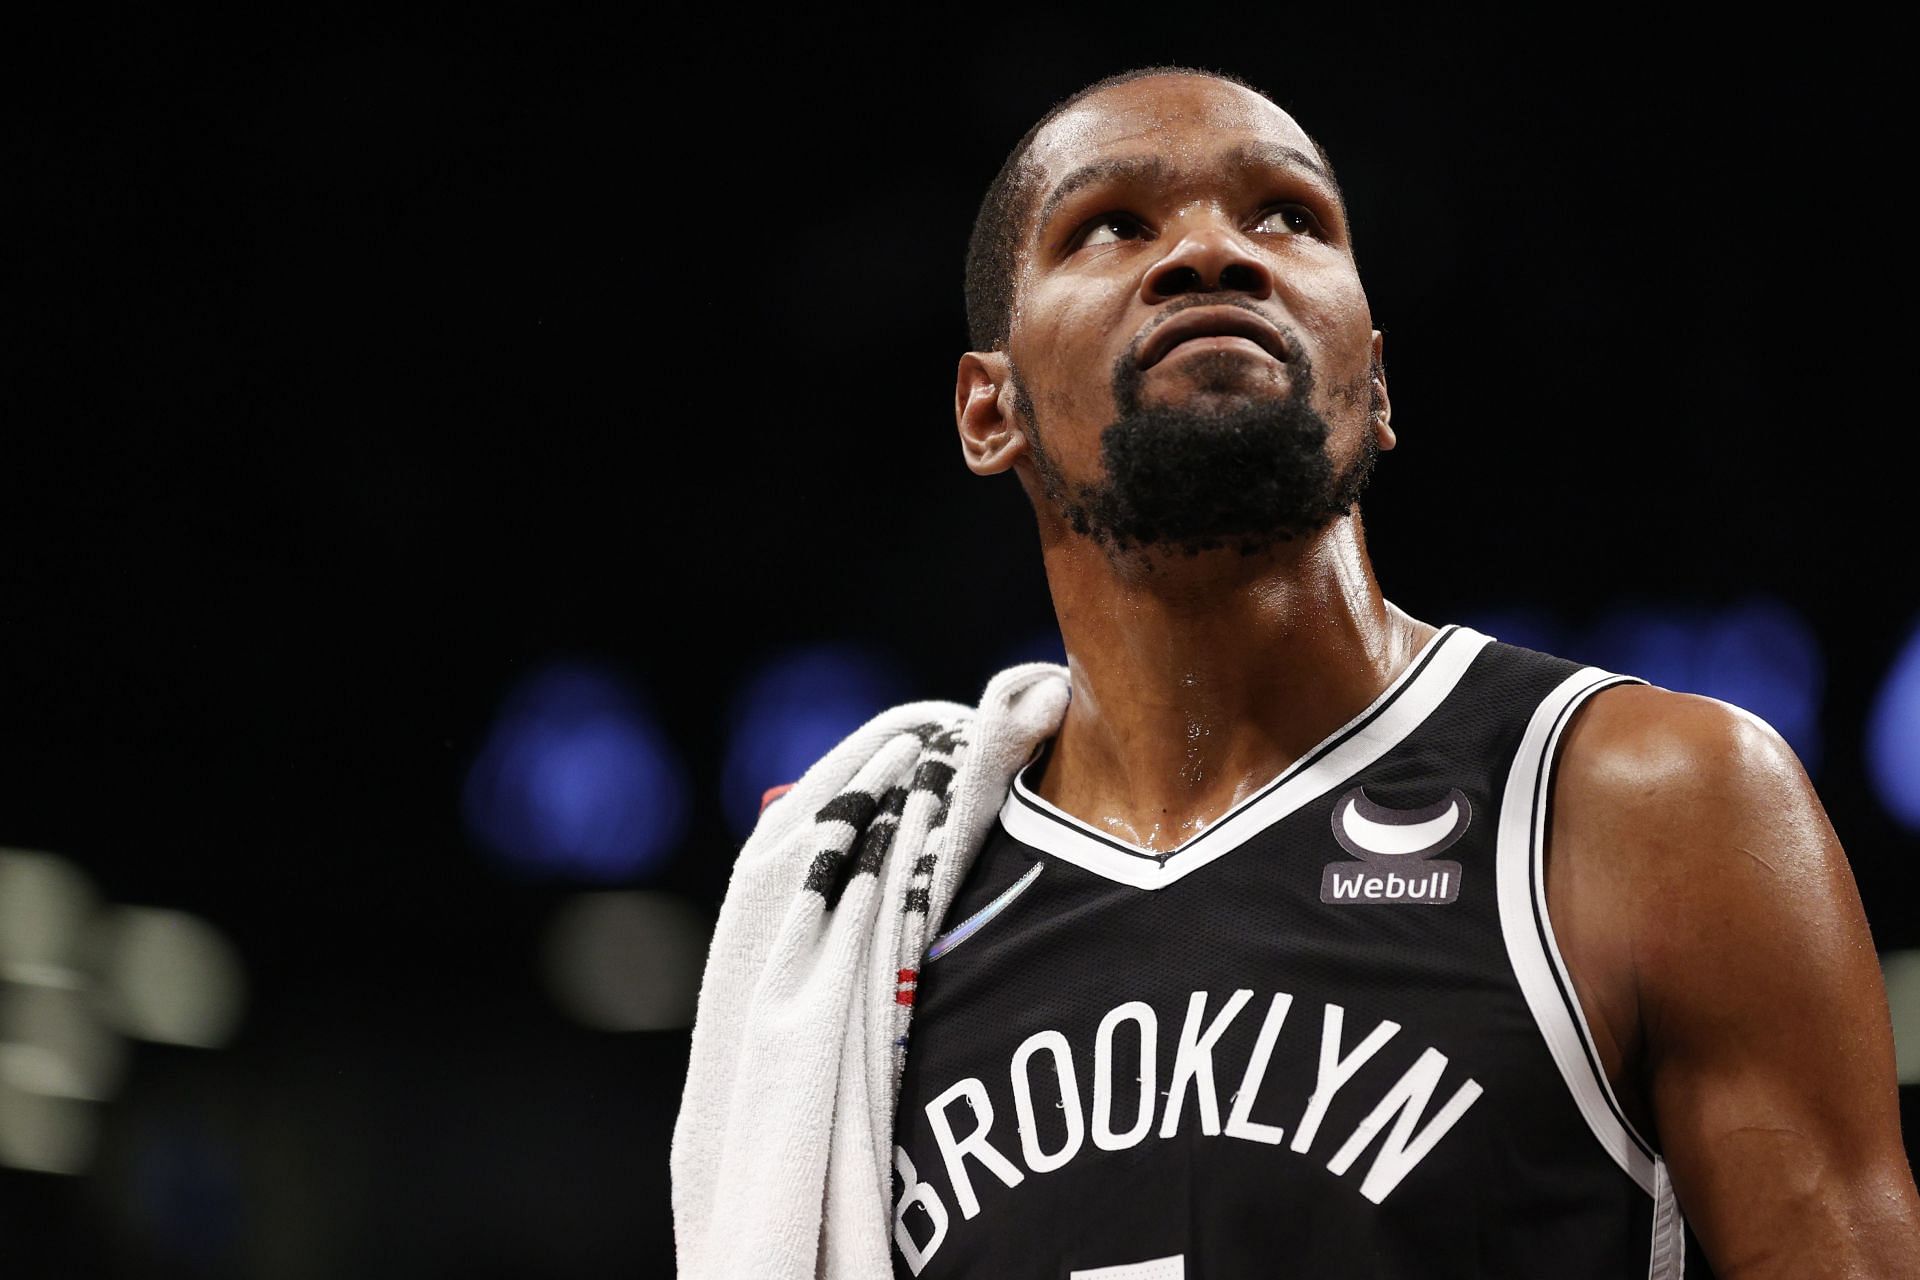 : Kevin Durant of the Brooklyn Nets looks on during the Eastern Conference play-in game against the Cleveland Cavaliers at Barclays Center on April 12 in the Brooklyn borough of New York City.